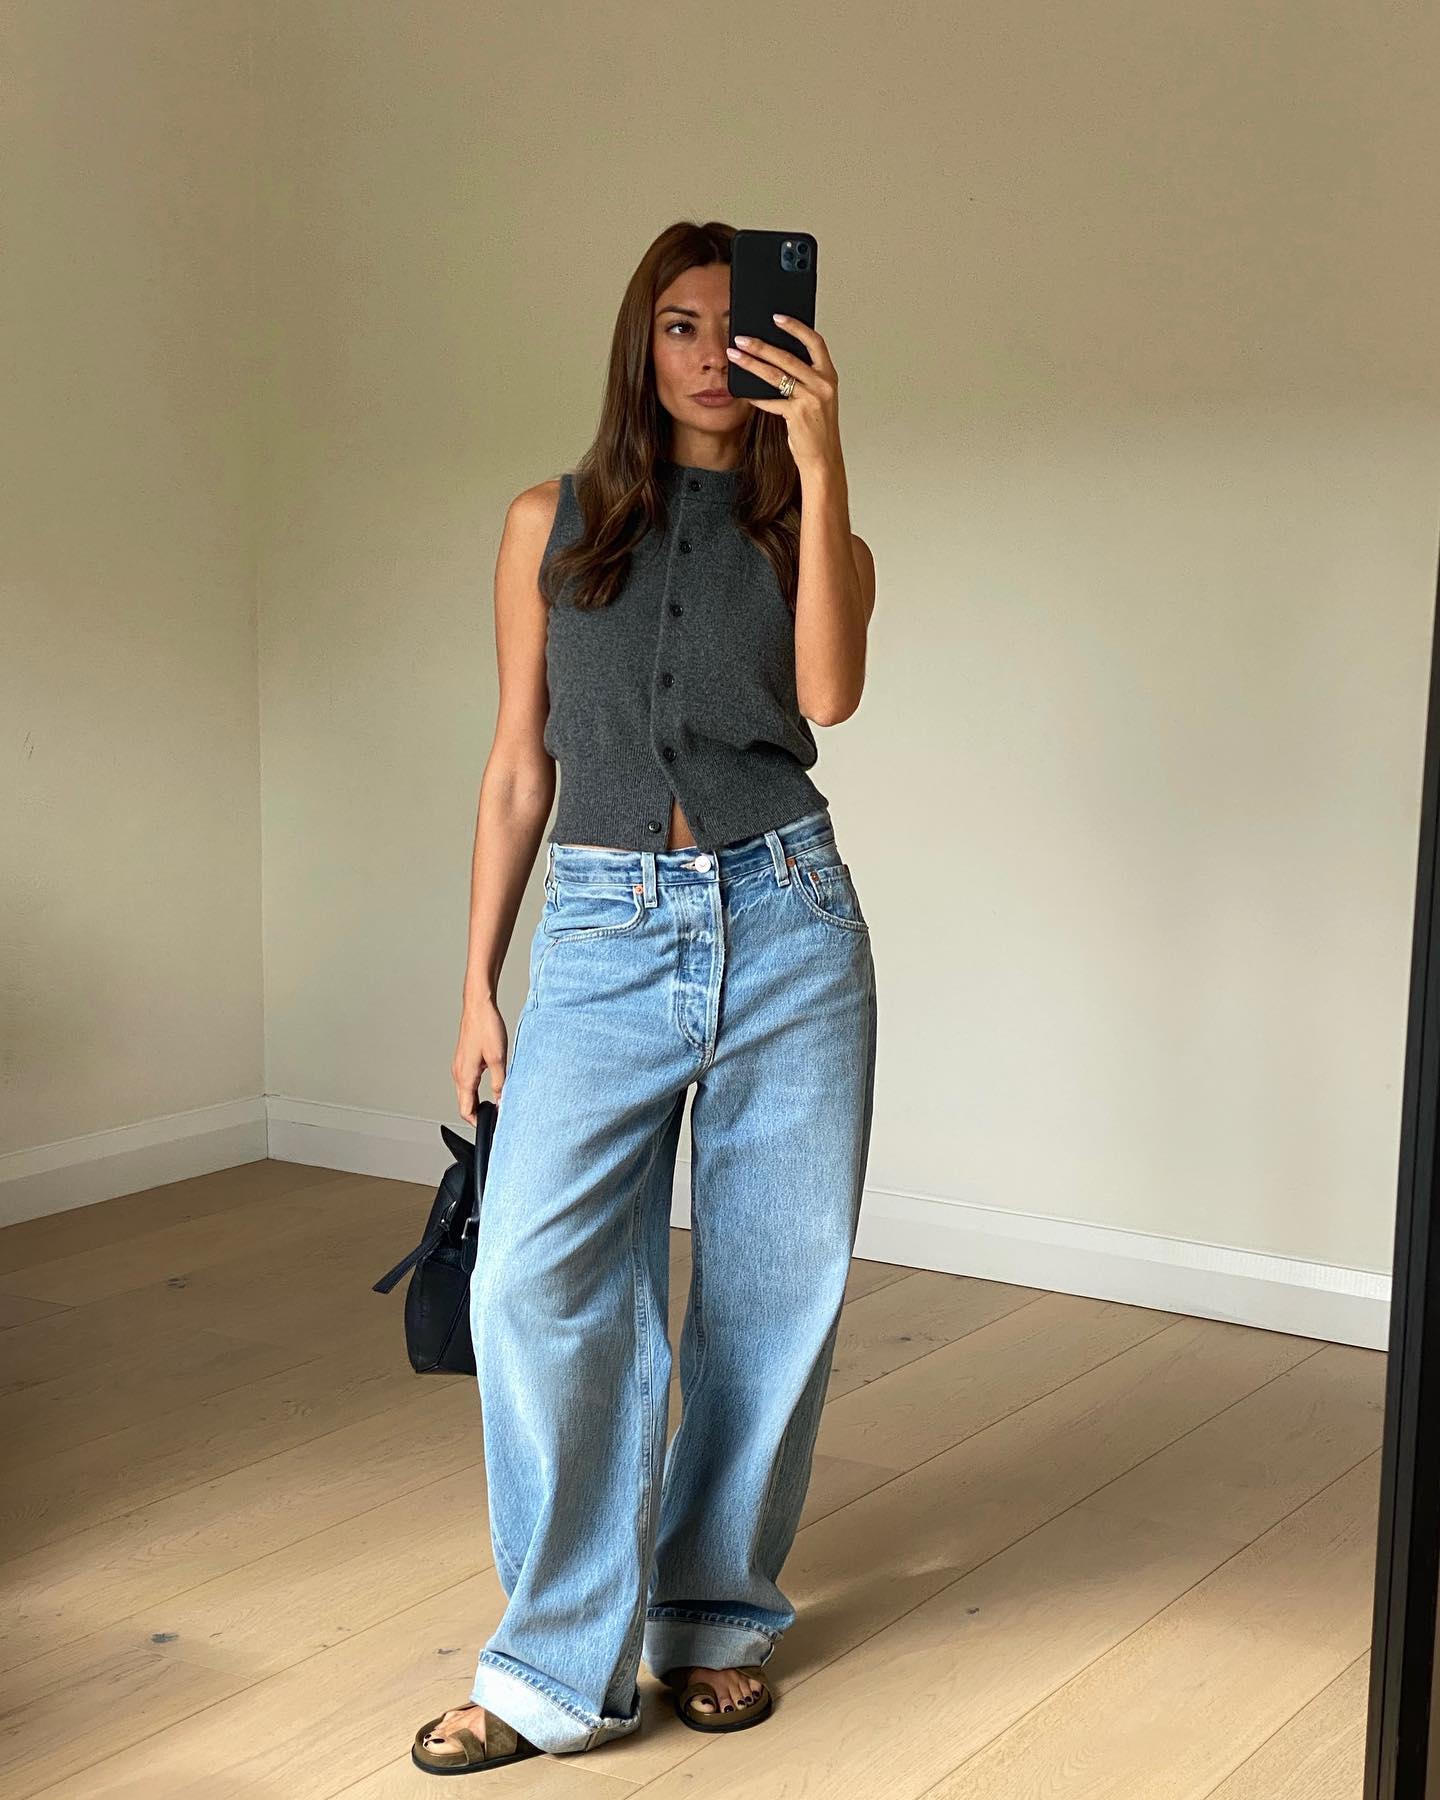 Marianne Smyth 13 Stylish Outfit Ideas With Cuffed Jeans Sleeveless Sweater Vest Baggy Denim Sandals